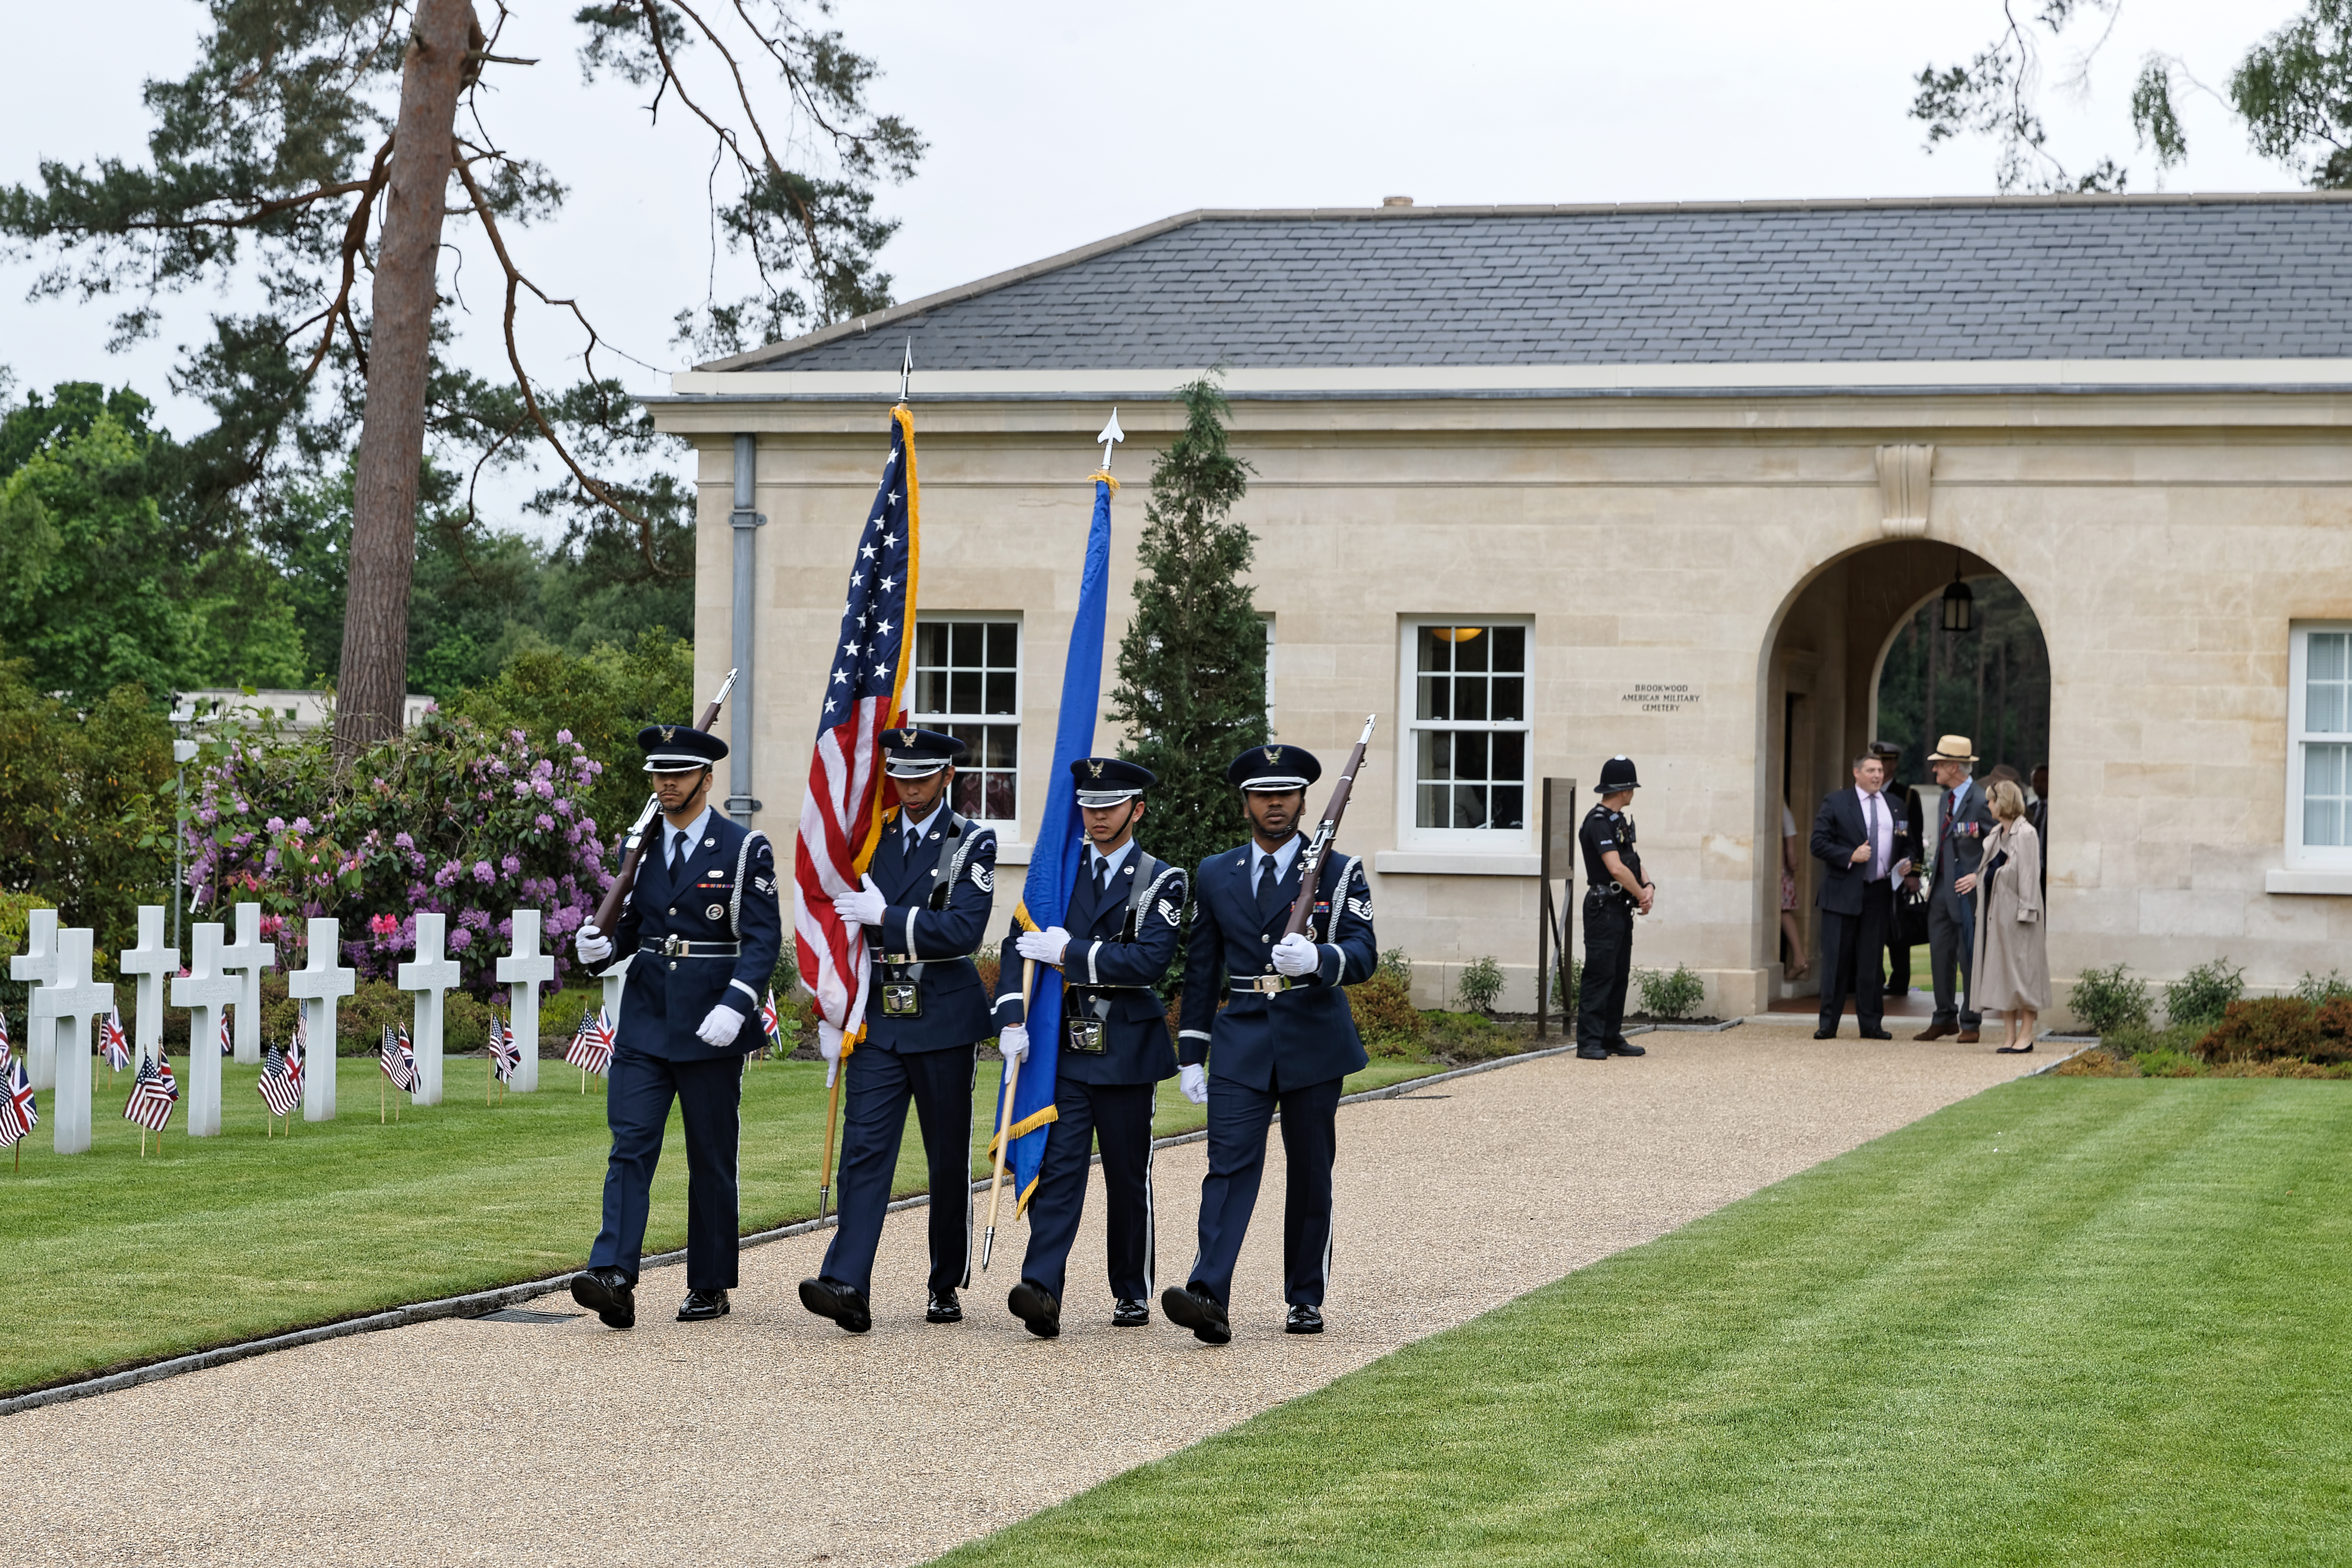 Men in uniform carry a flag or a rifle as part of the Honor Guard.